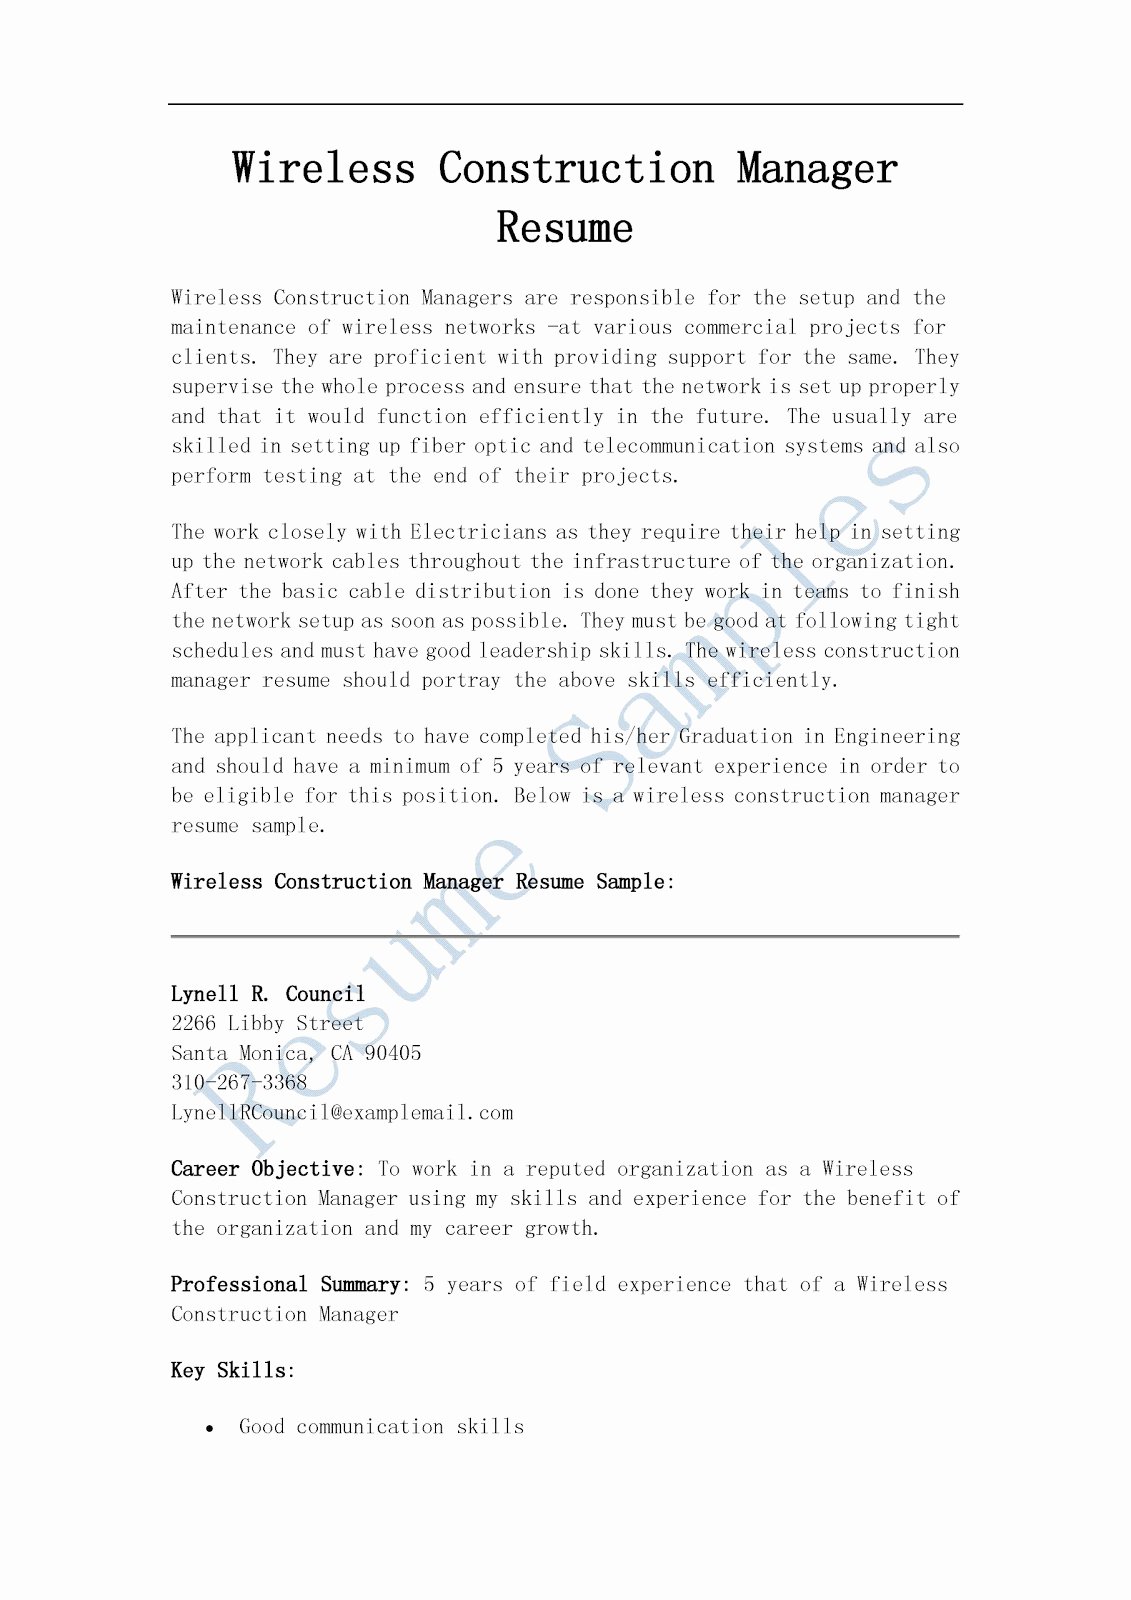 Resume Samples Wireless Construction Manager Resume